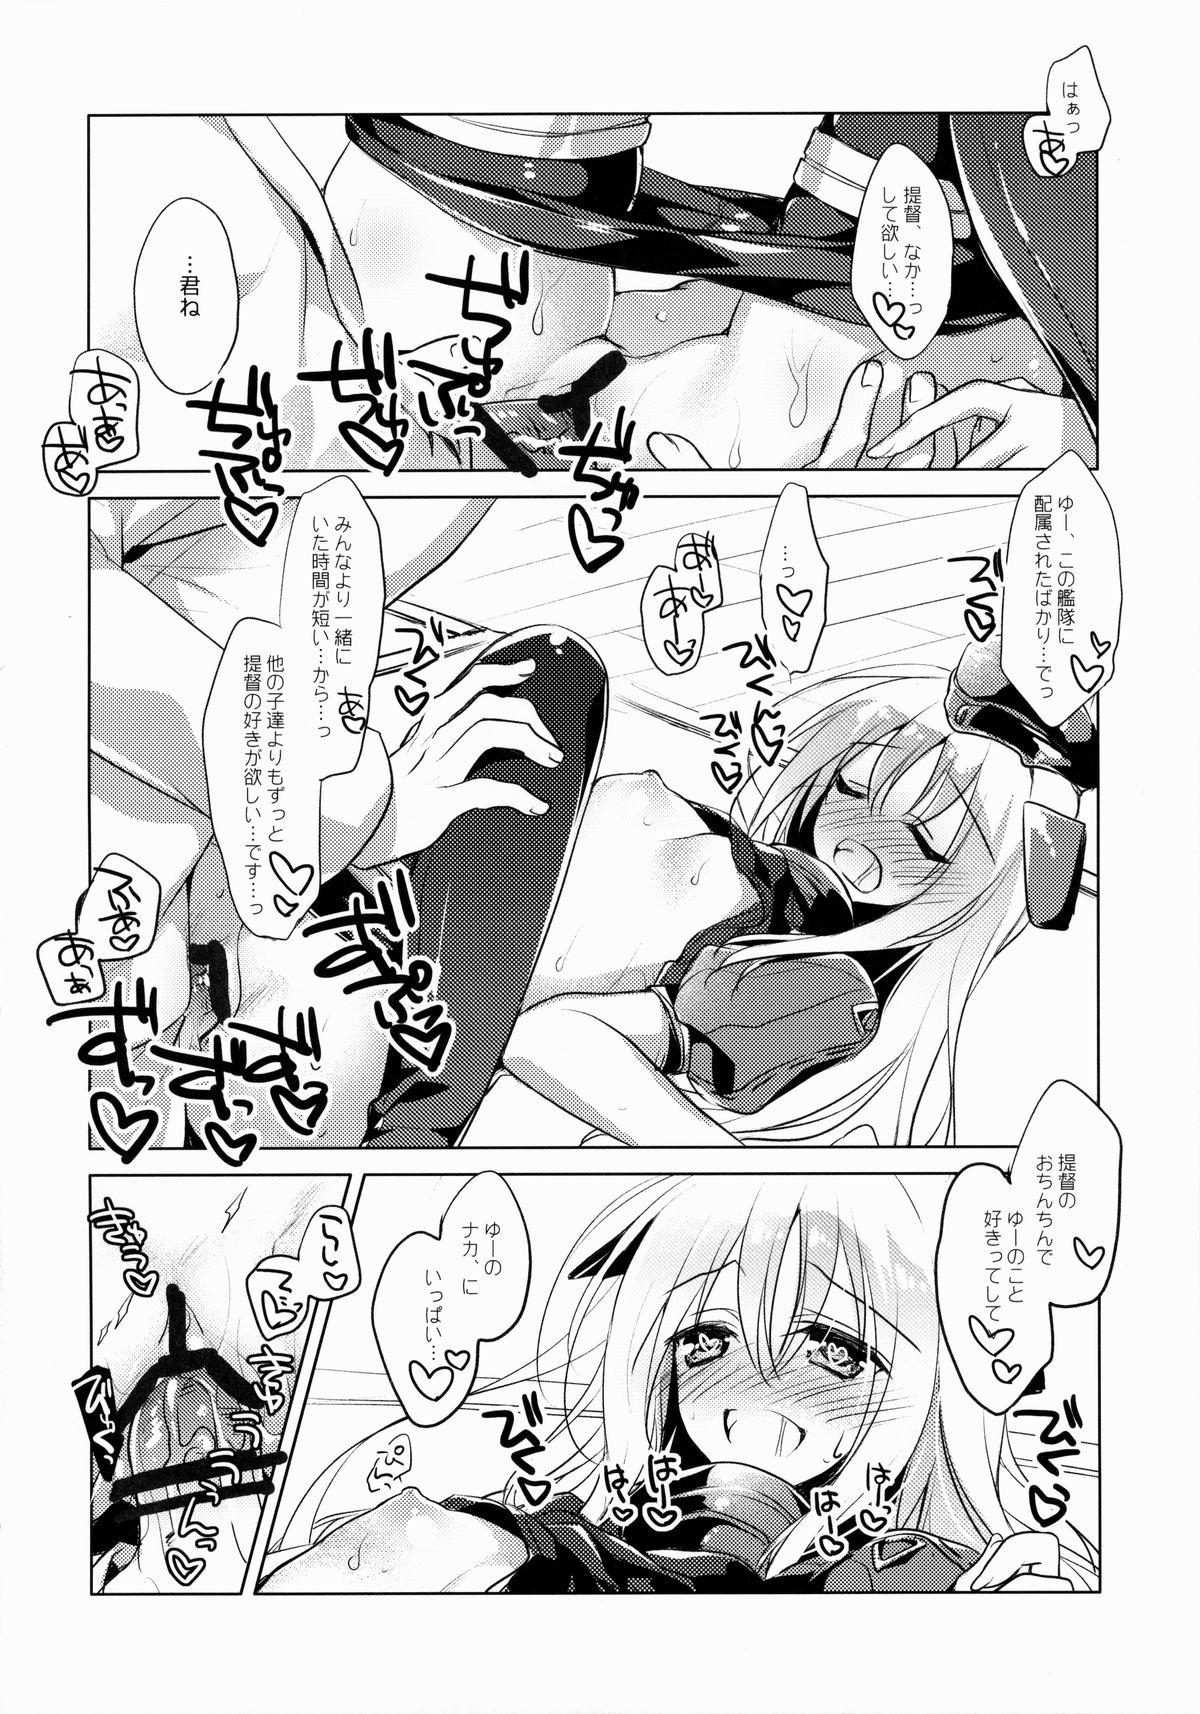 Cutie It's all about U - Kantai collection Bangla - Page 13